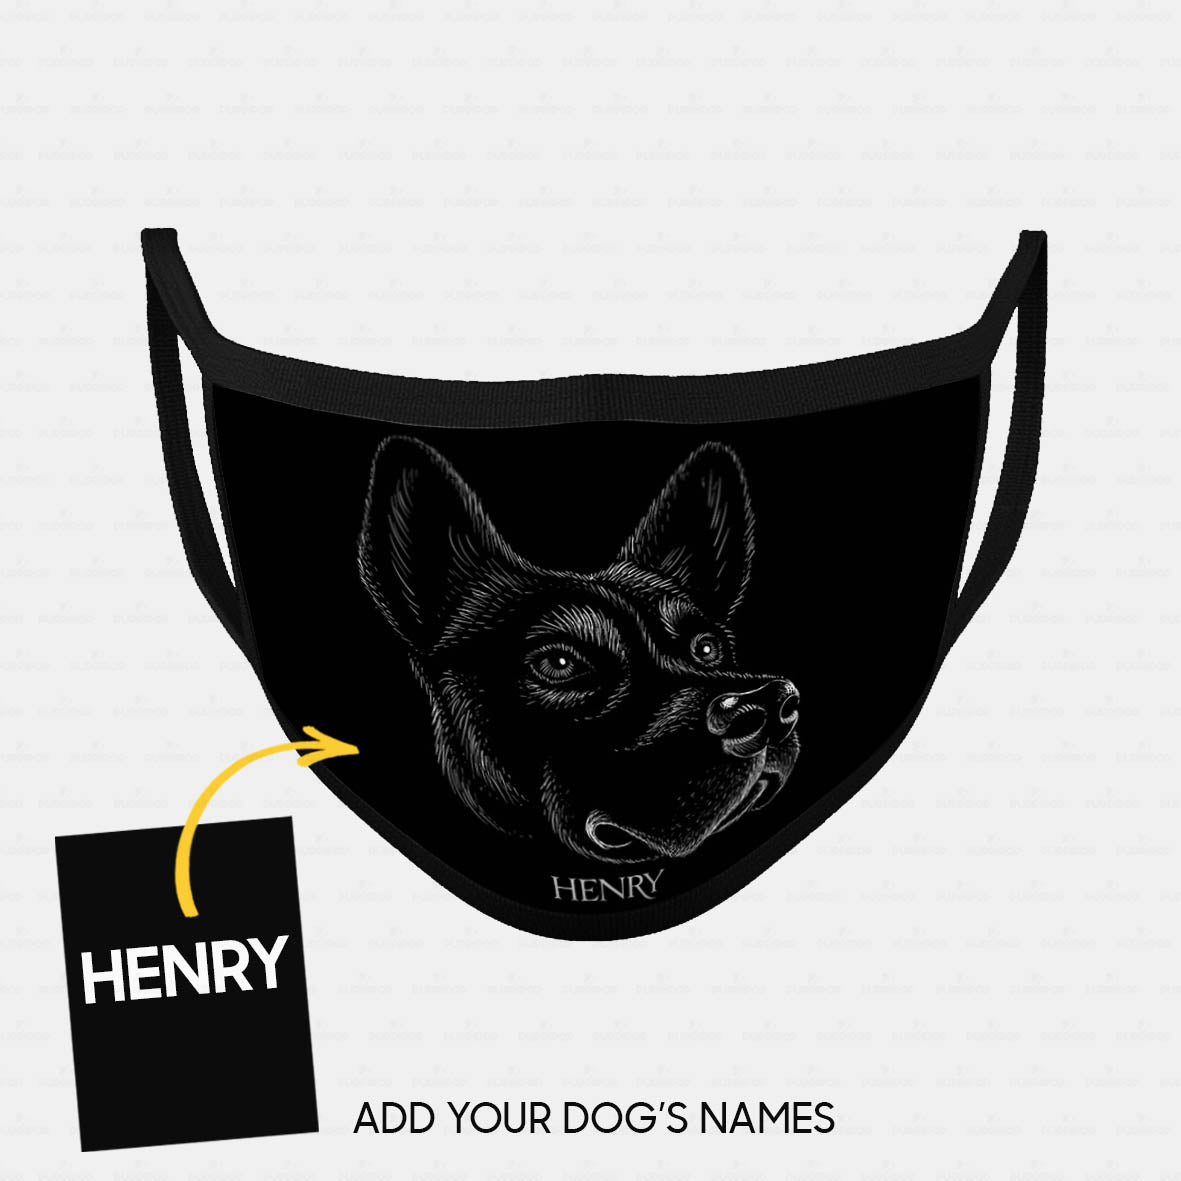 Personalized Dog Gift Idea - All Black Dog With Longer Ears For Dog Lovers - Cloth Mask